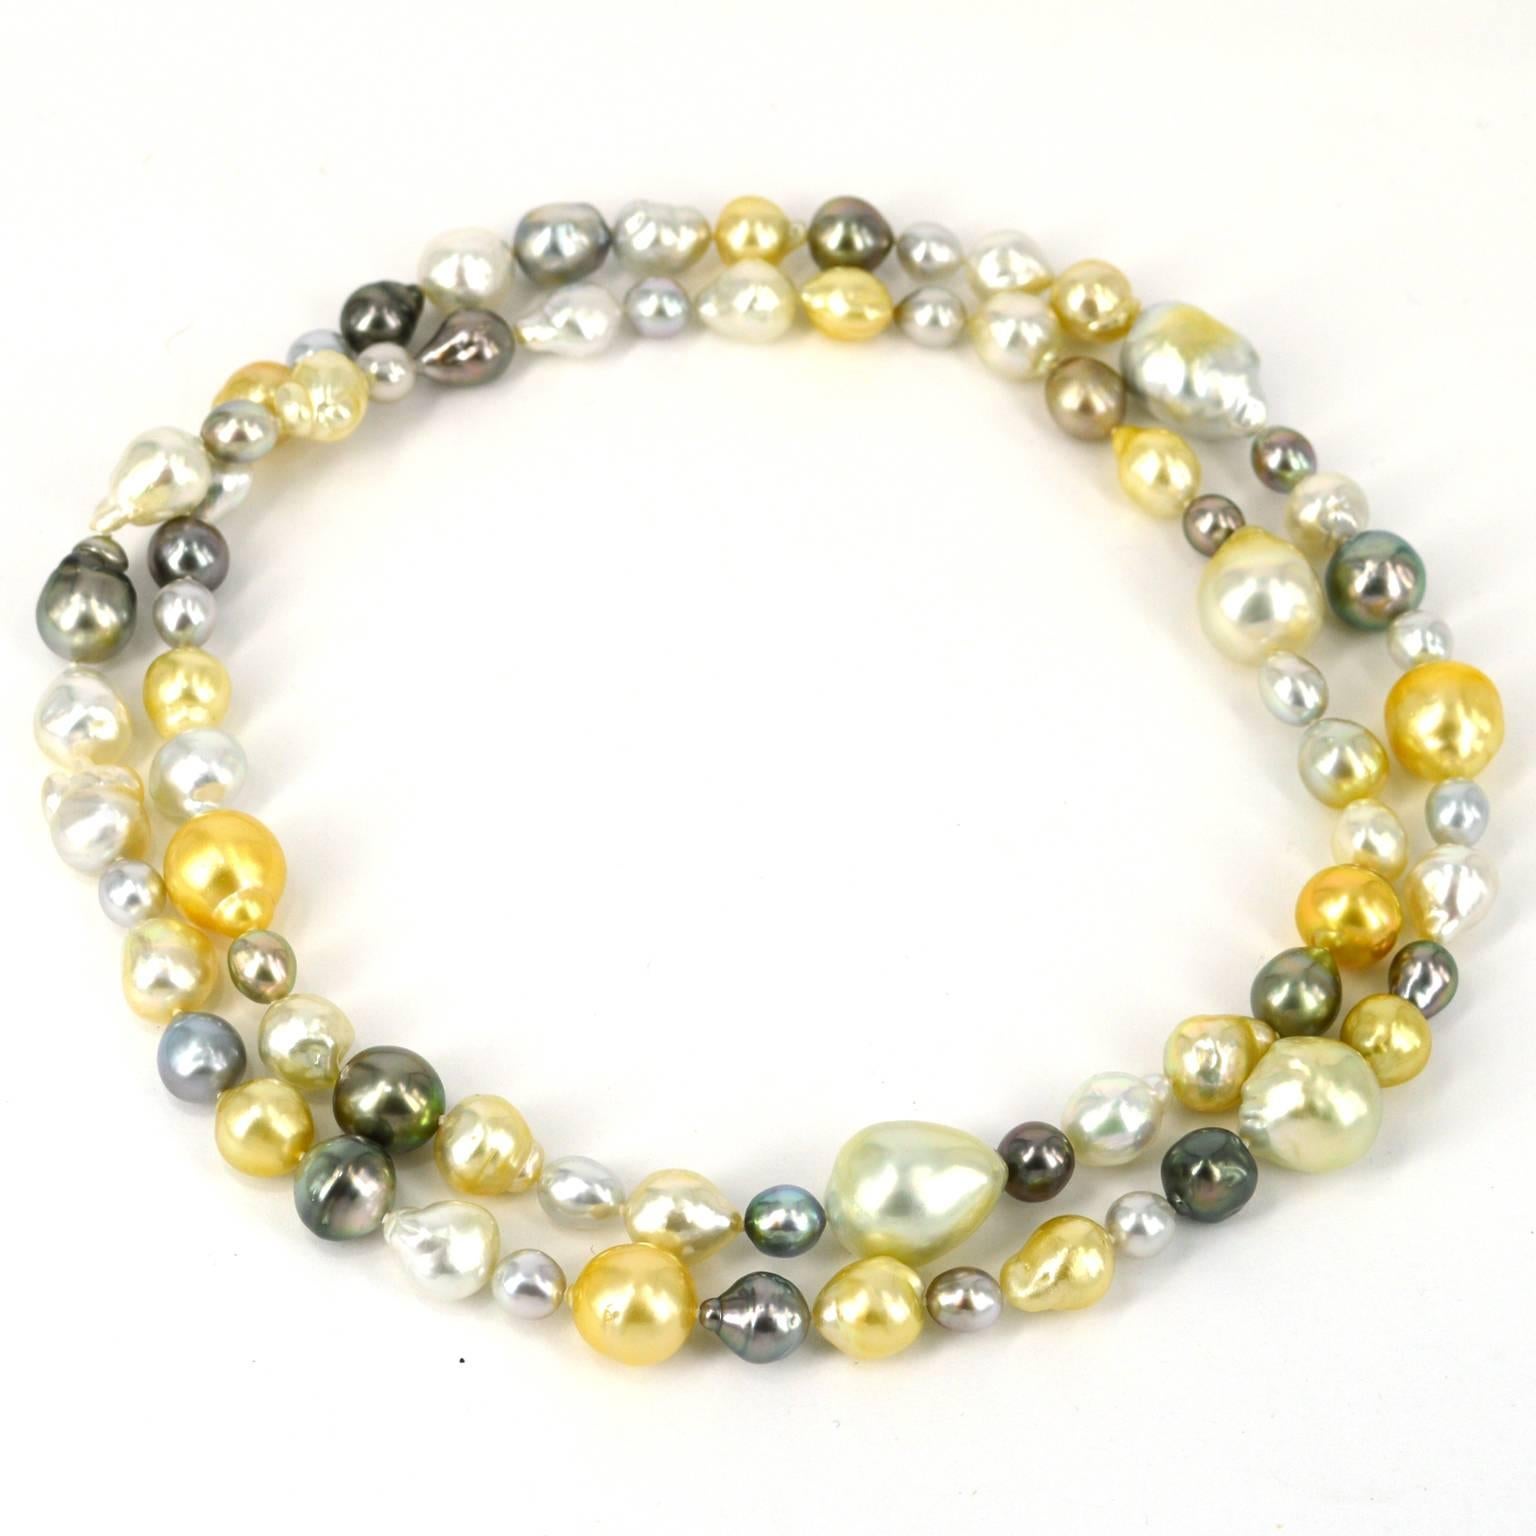 Adorn your neck in luxury with the soft tones of creams whites gold and greys. A mix of baroque South Sea and Tahitian Pearls ranging from 9mm to 20mm.
A long necklace 92cm in length. Hand knotted on soft grey thread.

All Pearls are natural and as